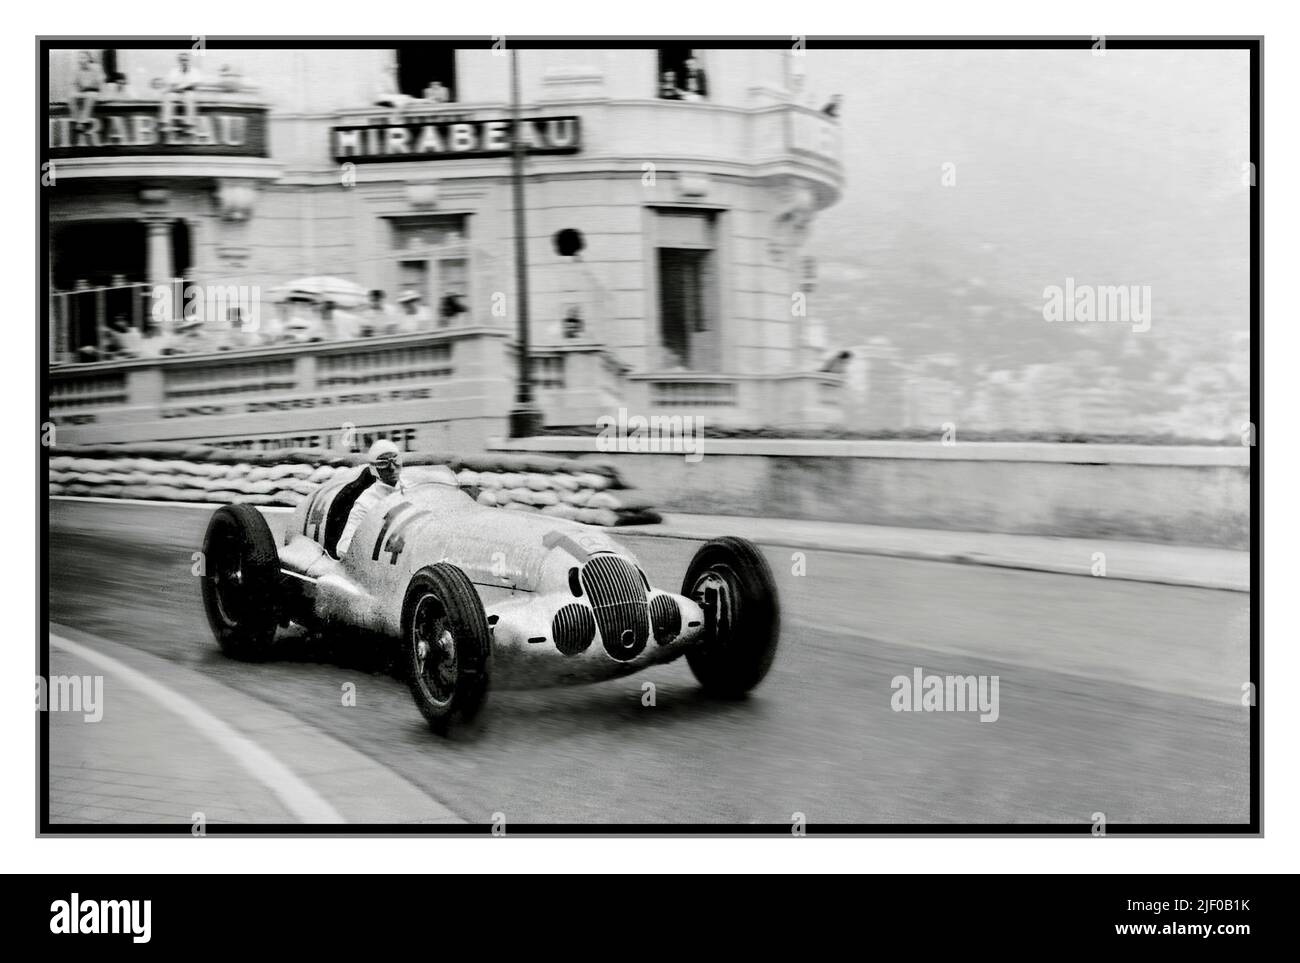 1936: Mercedes-Benz  Manfred von Brauchitsch with Silver Arrow 750-kg formula racing car W 125k at Mirabeau on the Monaco Grand Prix motor racing circuit Monaco Monte Carlo The 1936 Monaco Grand Prix was a Grand Prix motor race held at Circuit de Monaco on 13 April 1936. Mercedes came First. Germany Rudolf Caracciola Mercedes-Benz Stock Photo